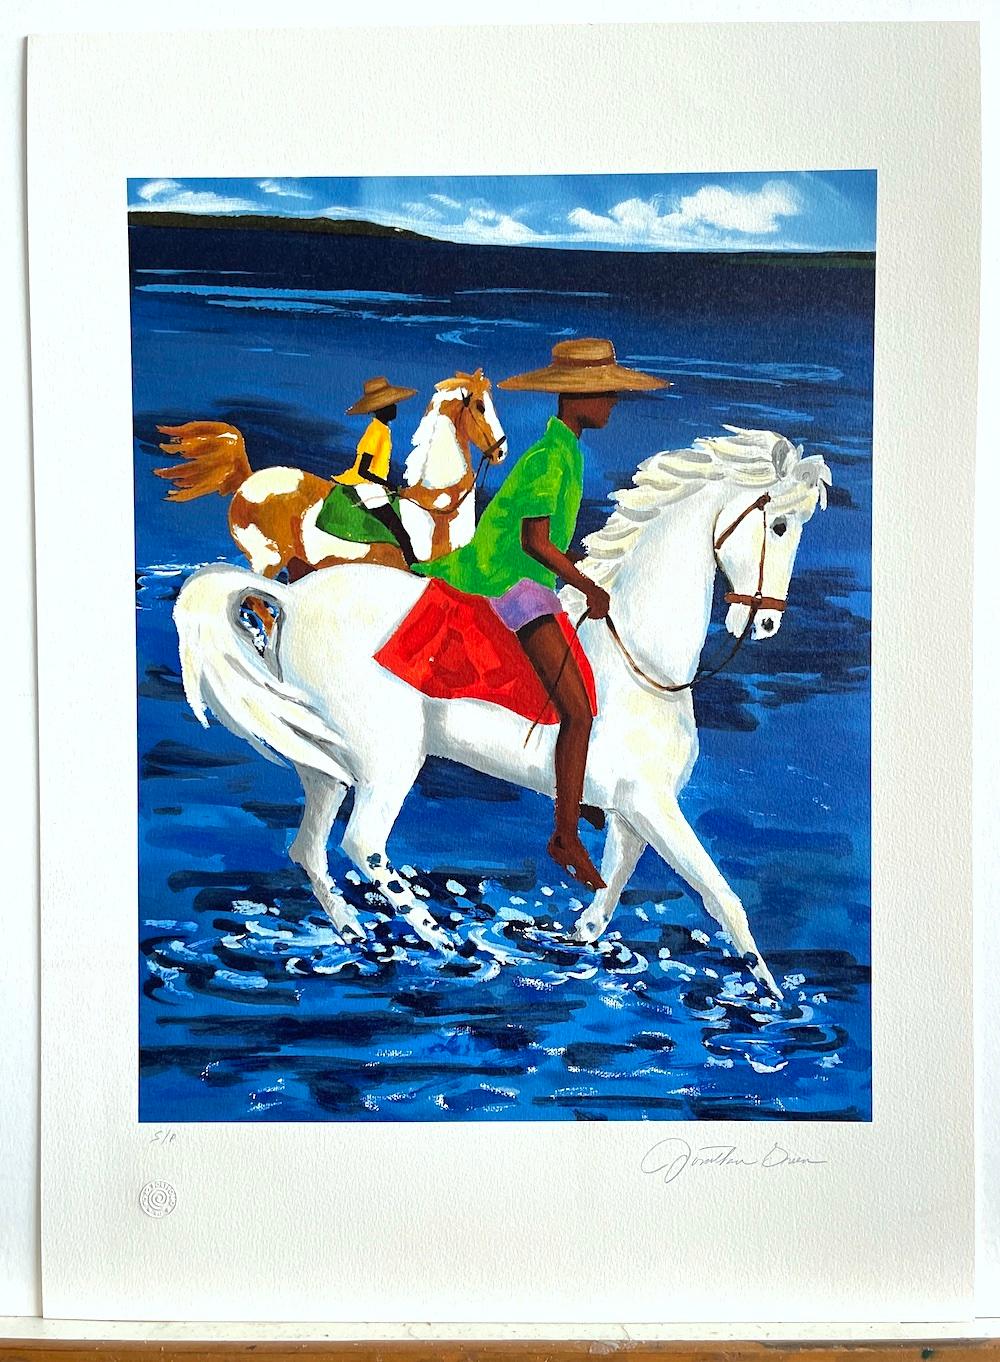 FATHER & SON Signed Lithograph, Horseback Riding Lowcountry SC, Gullah Culture - Contemporary Print by Jonathan Green